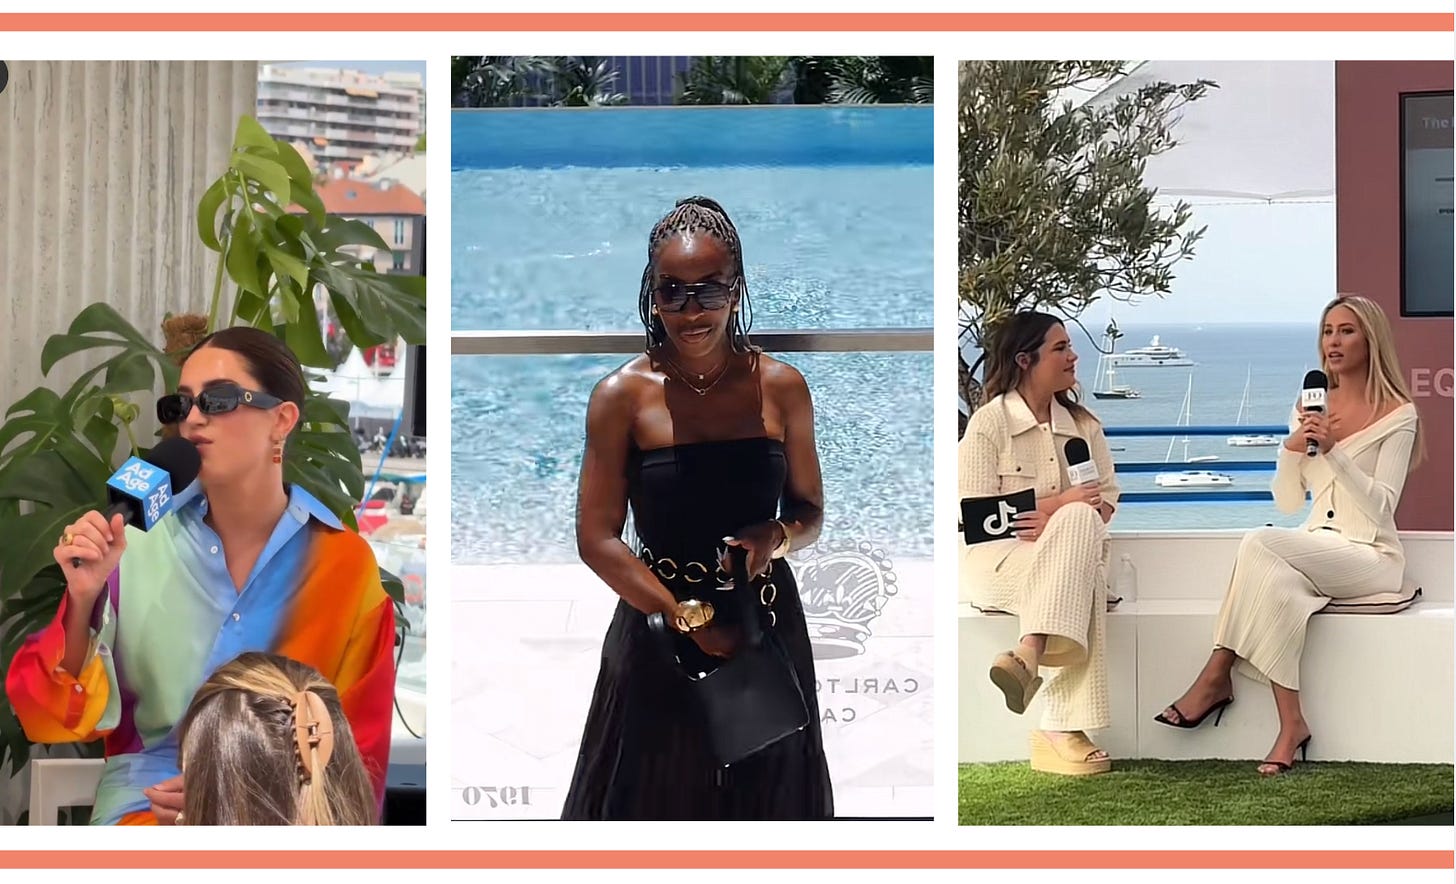 3 screenshots of vertical video. From left to right creators at Cannes: Tinx with a nAd Age blue microphone, Jackie Aina in a black dress in front of a pool and Alix Earle being interviewed by TikTok with water and boats in the background